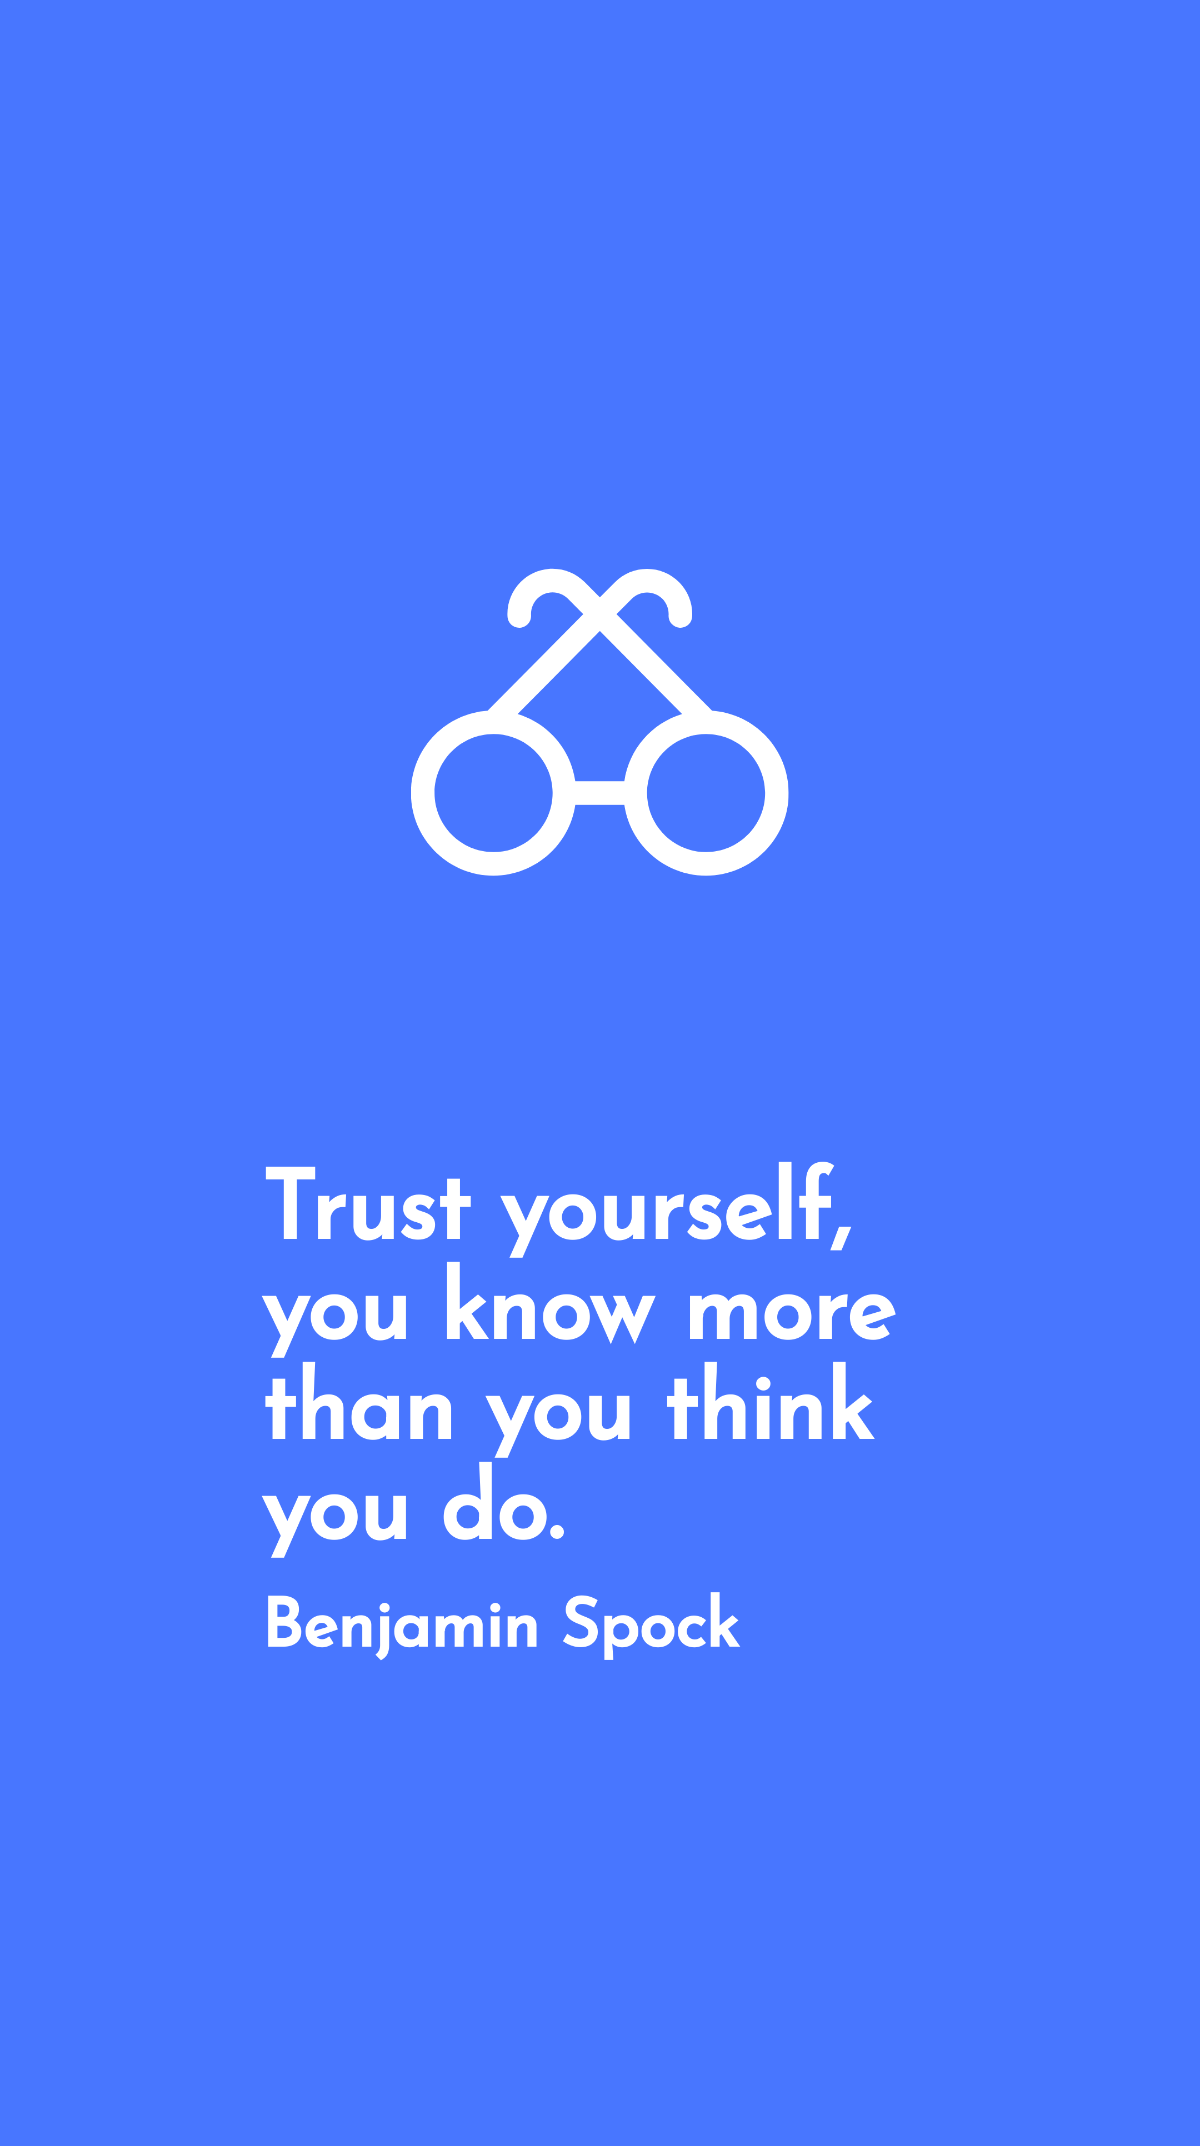 Free Benjamin Spock - Trust yourself, you know more than you think you do. Template